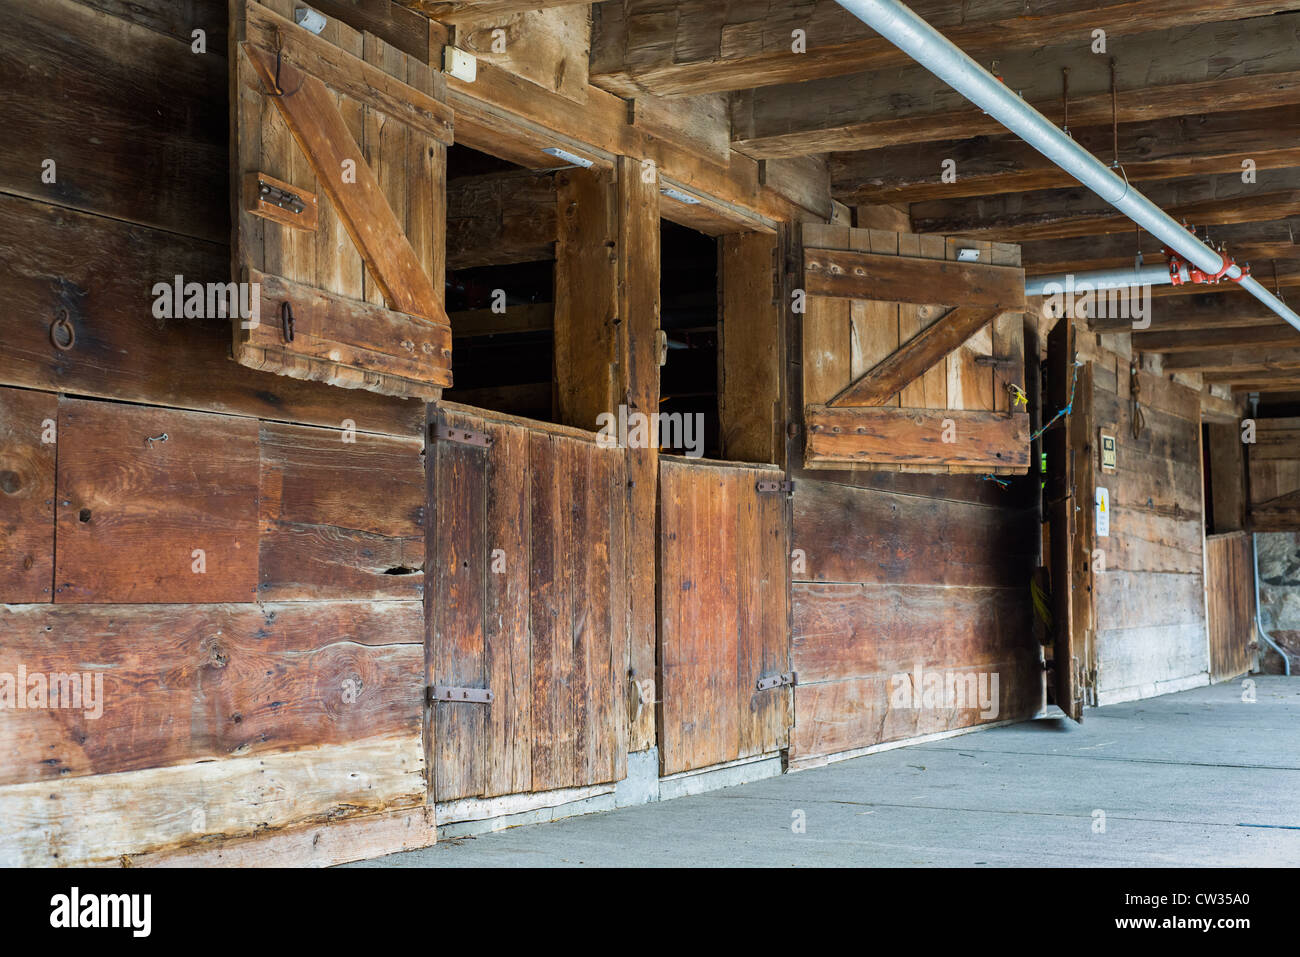 This is an image of stable doors on a traditional Ontario stable barn. Stock Photo